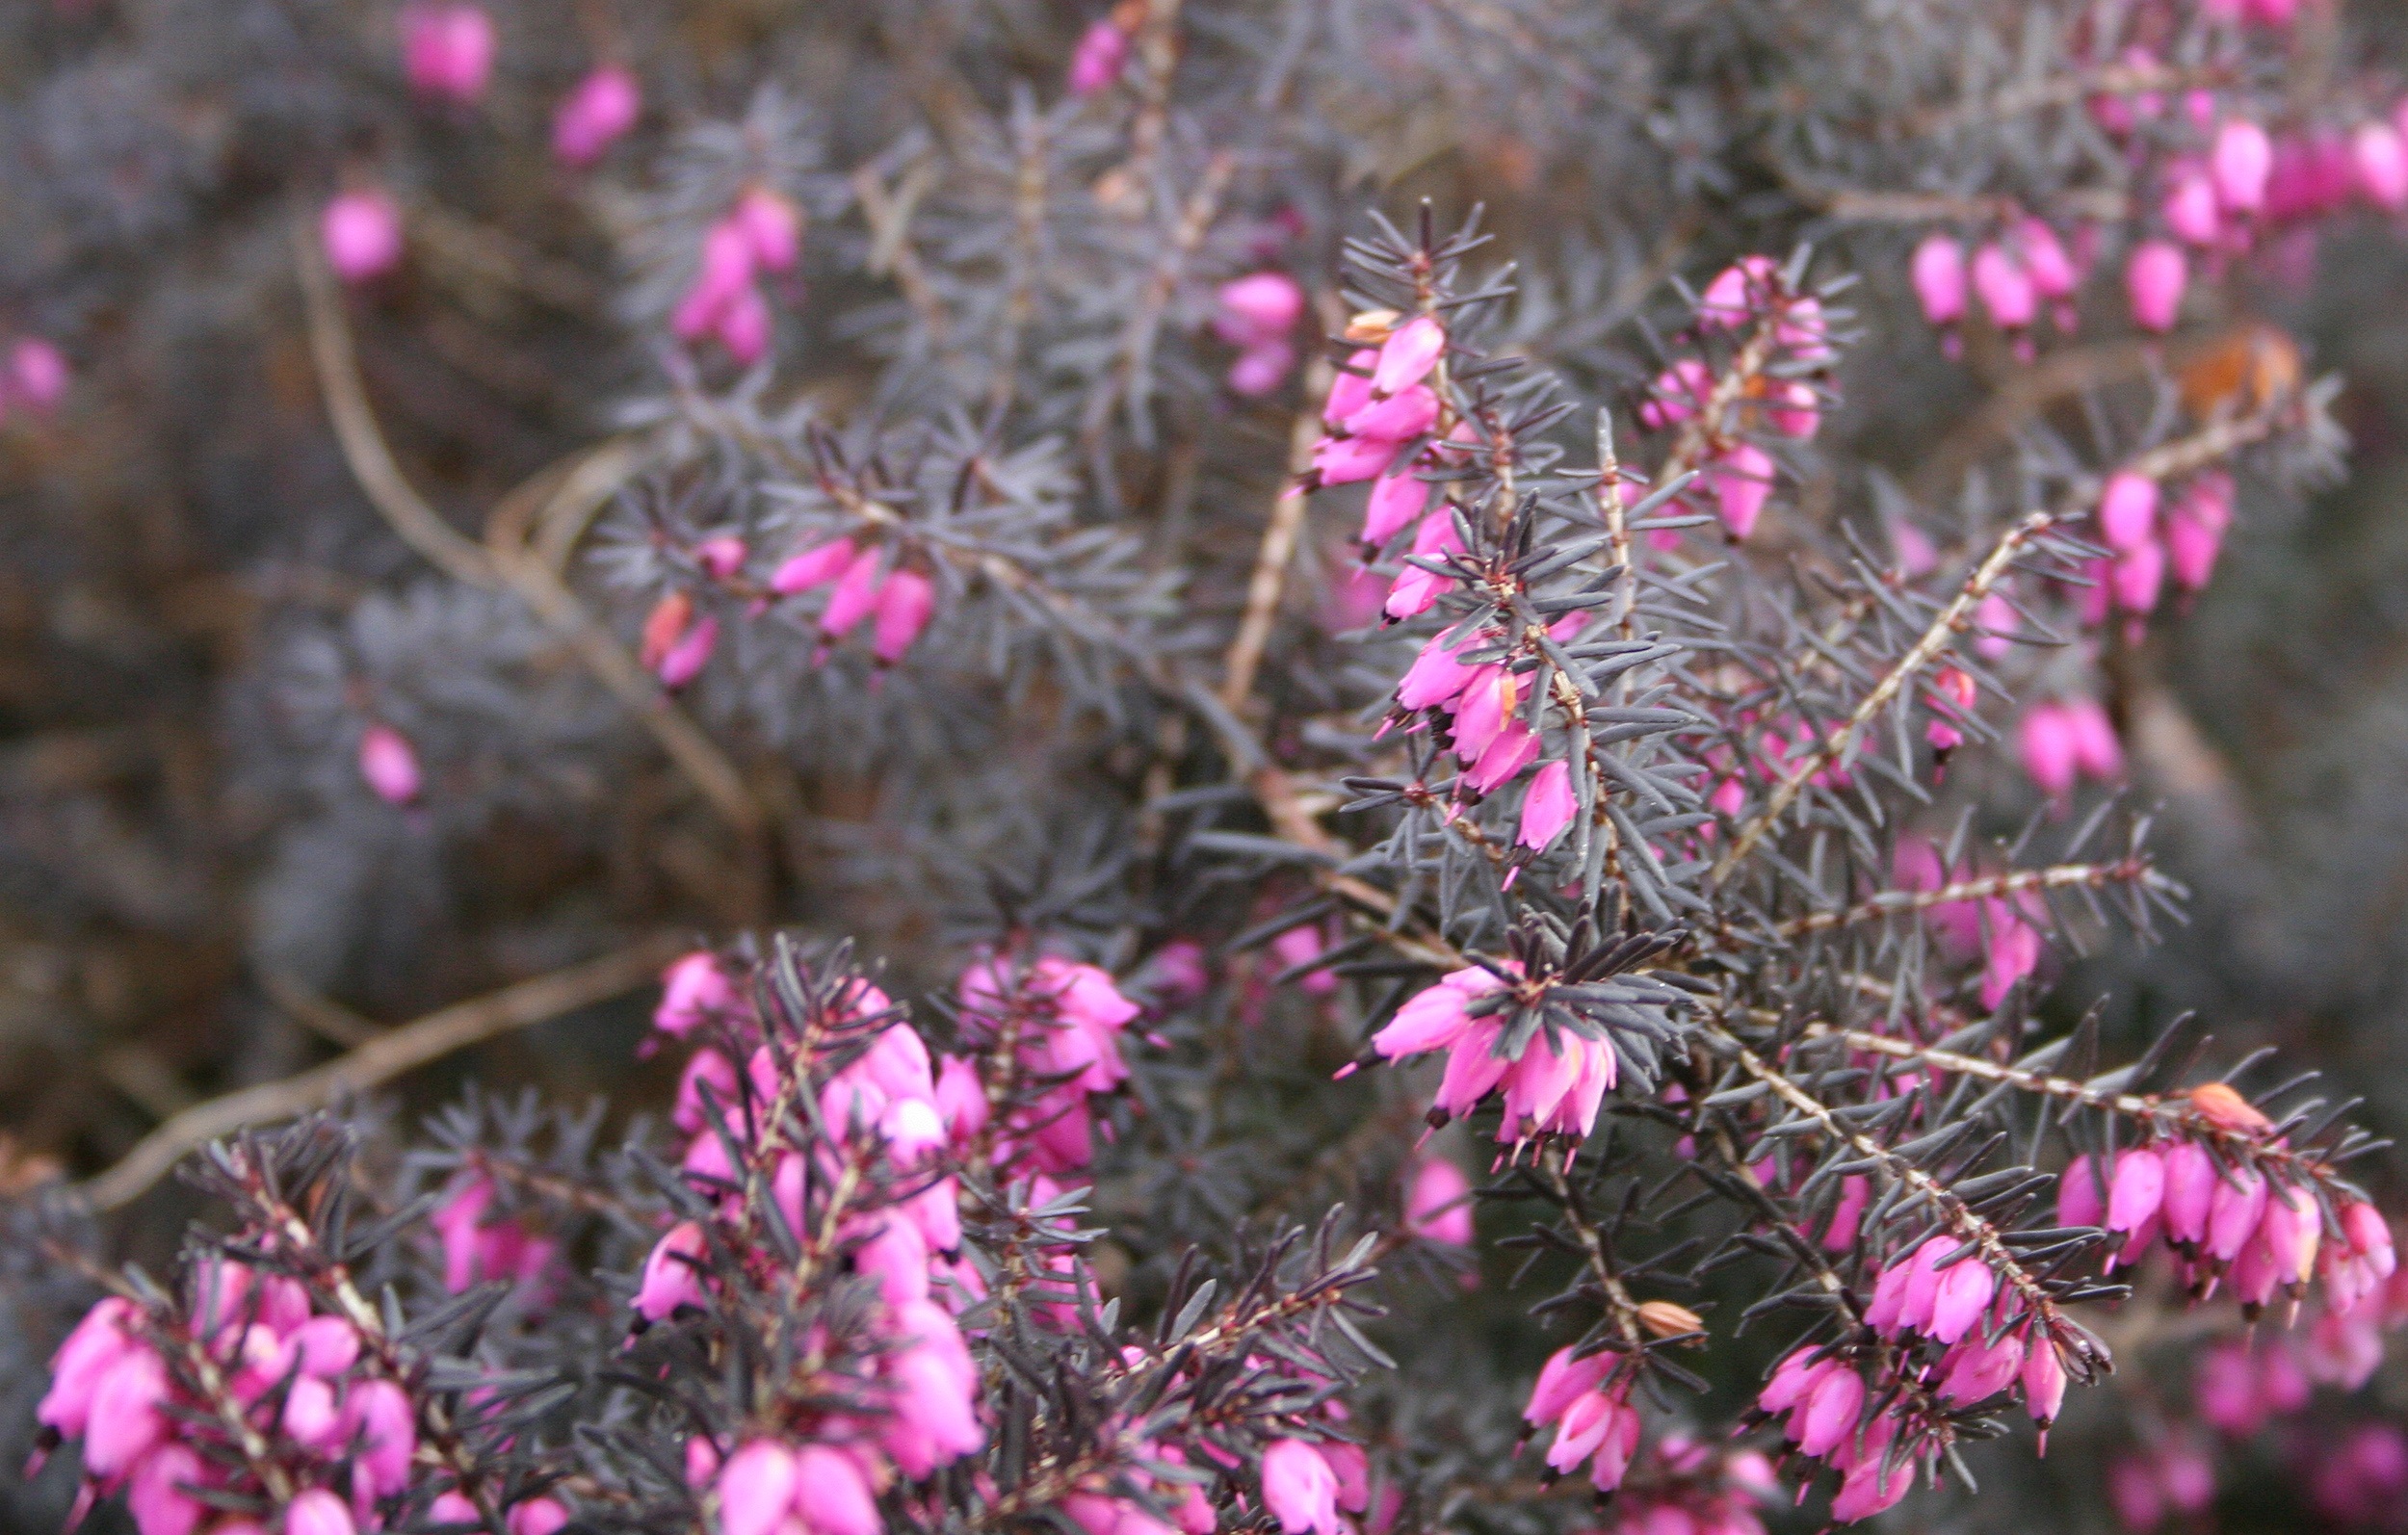 Bush with tiny pink flowers free image